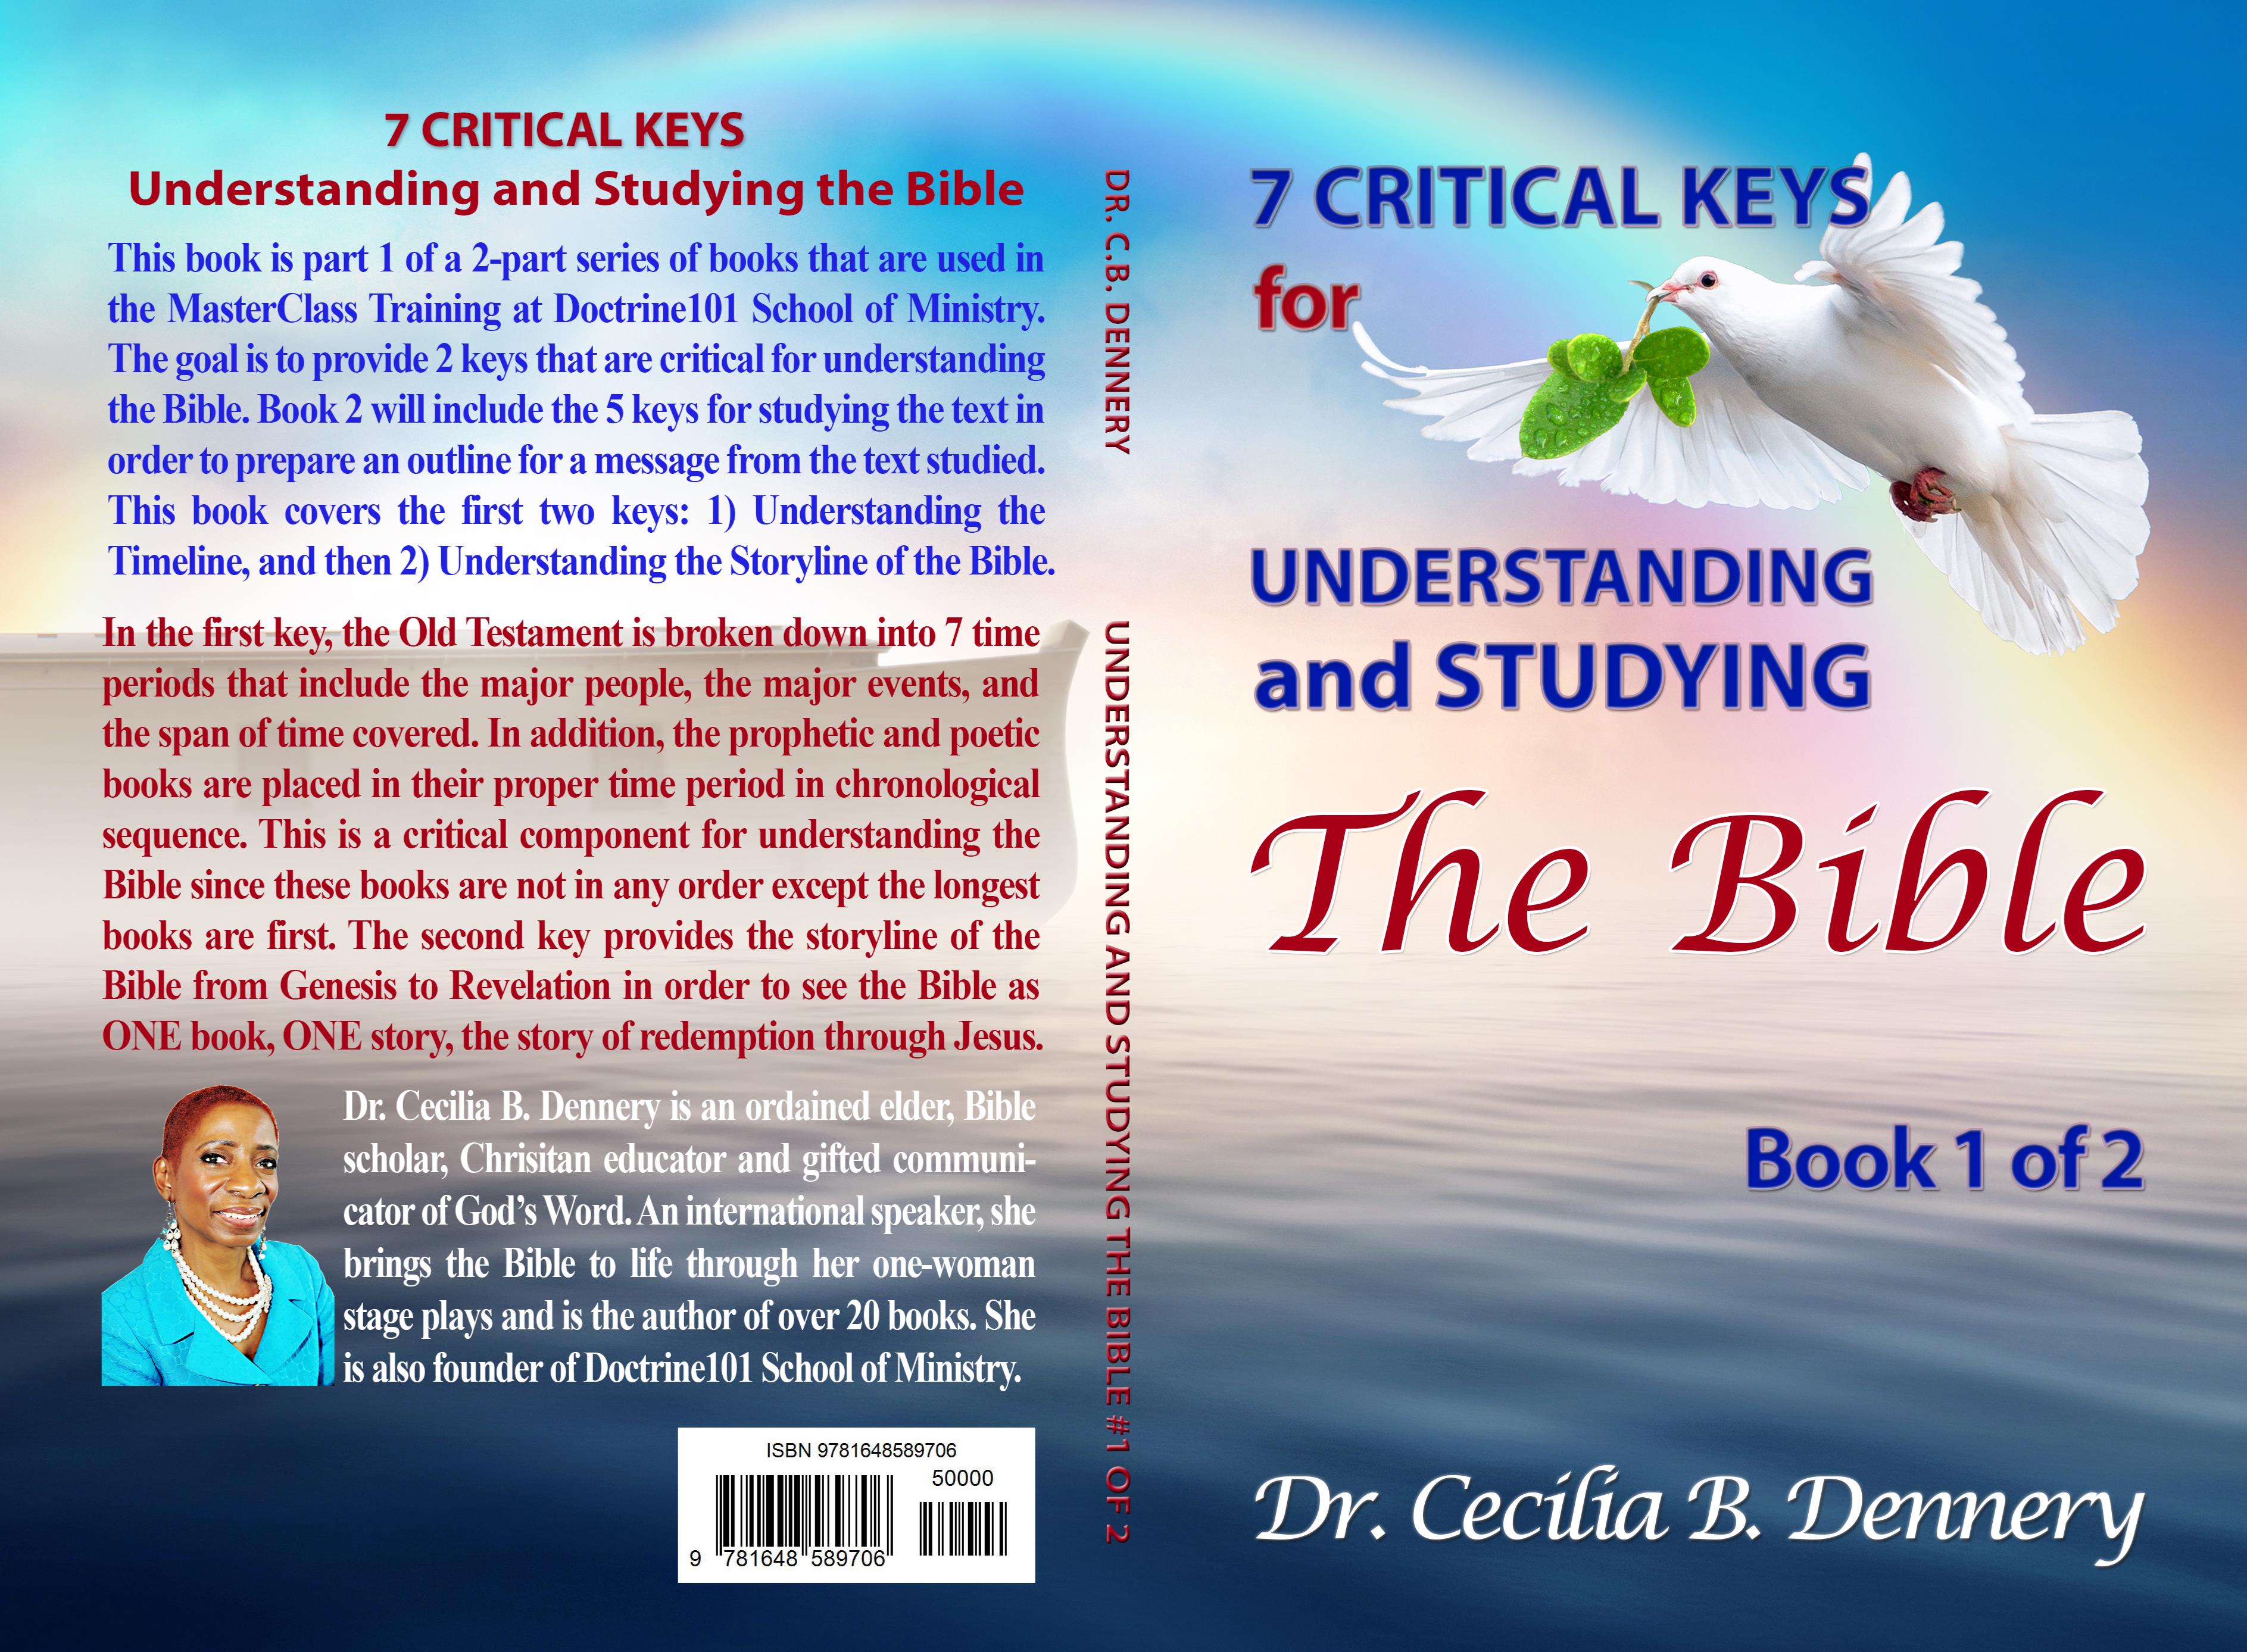 7 Critical Keys for Understanding and Studying the Bible: Book 1 of 2 cover image